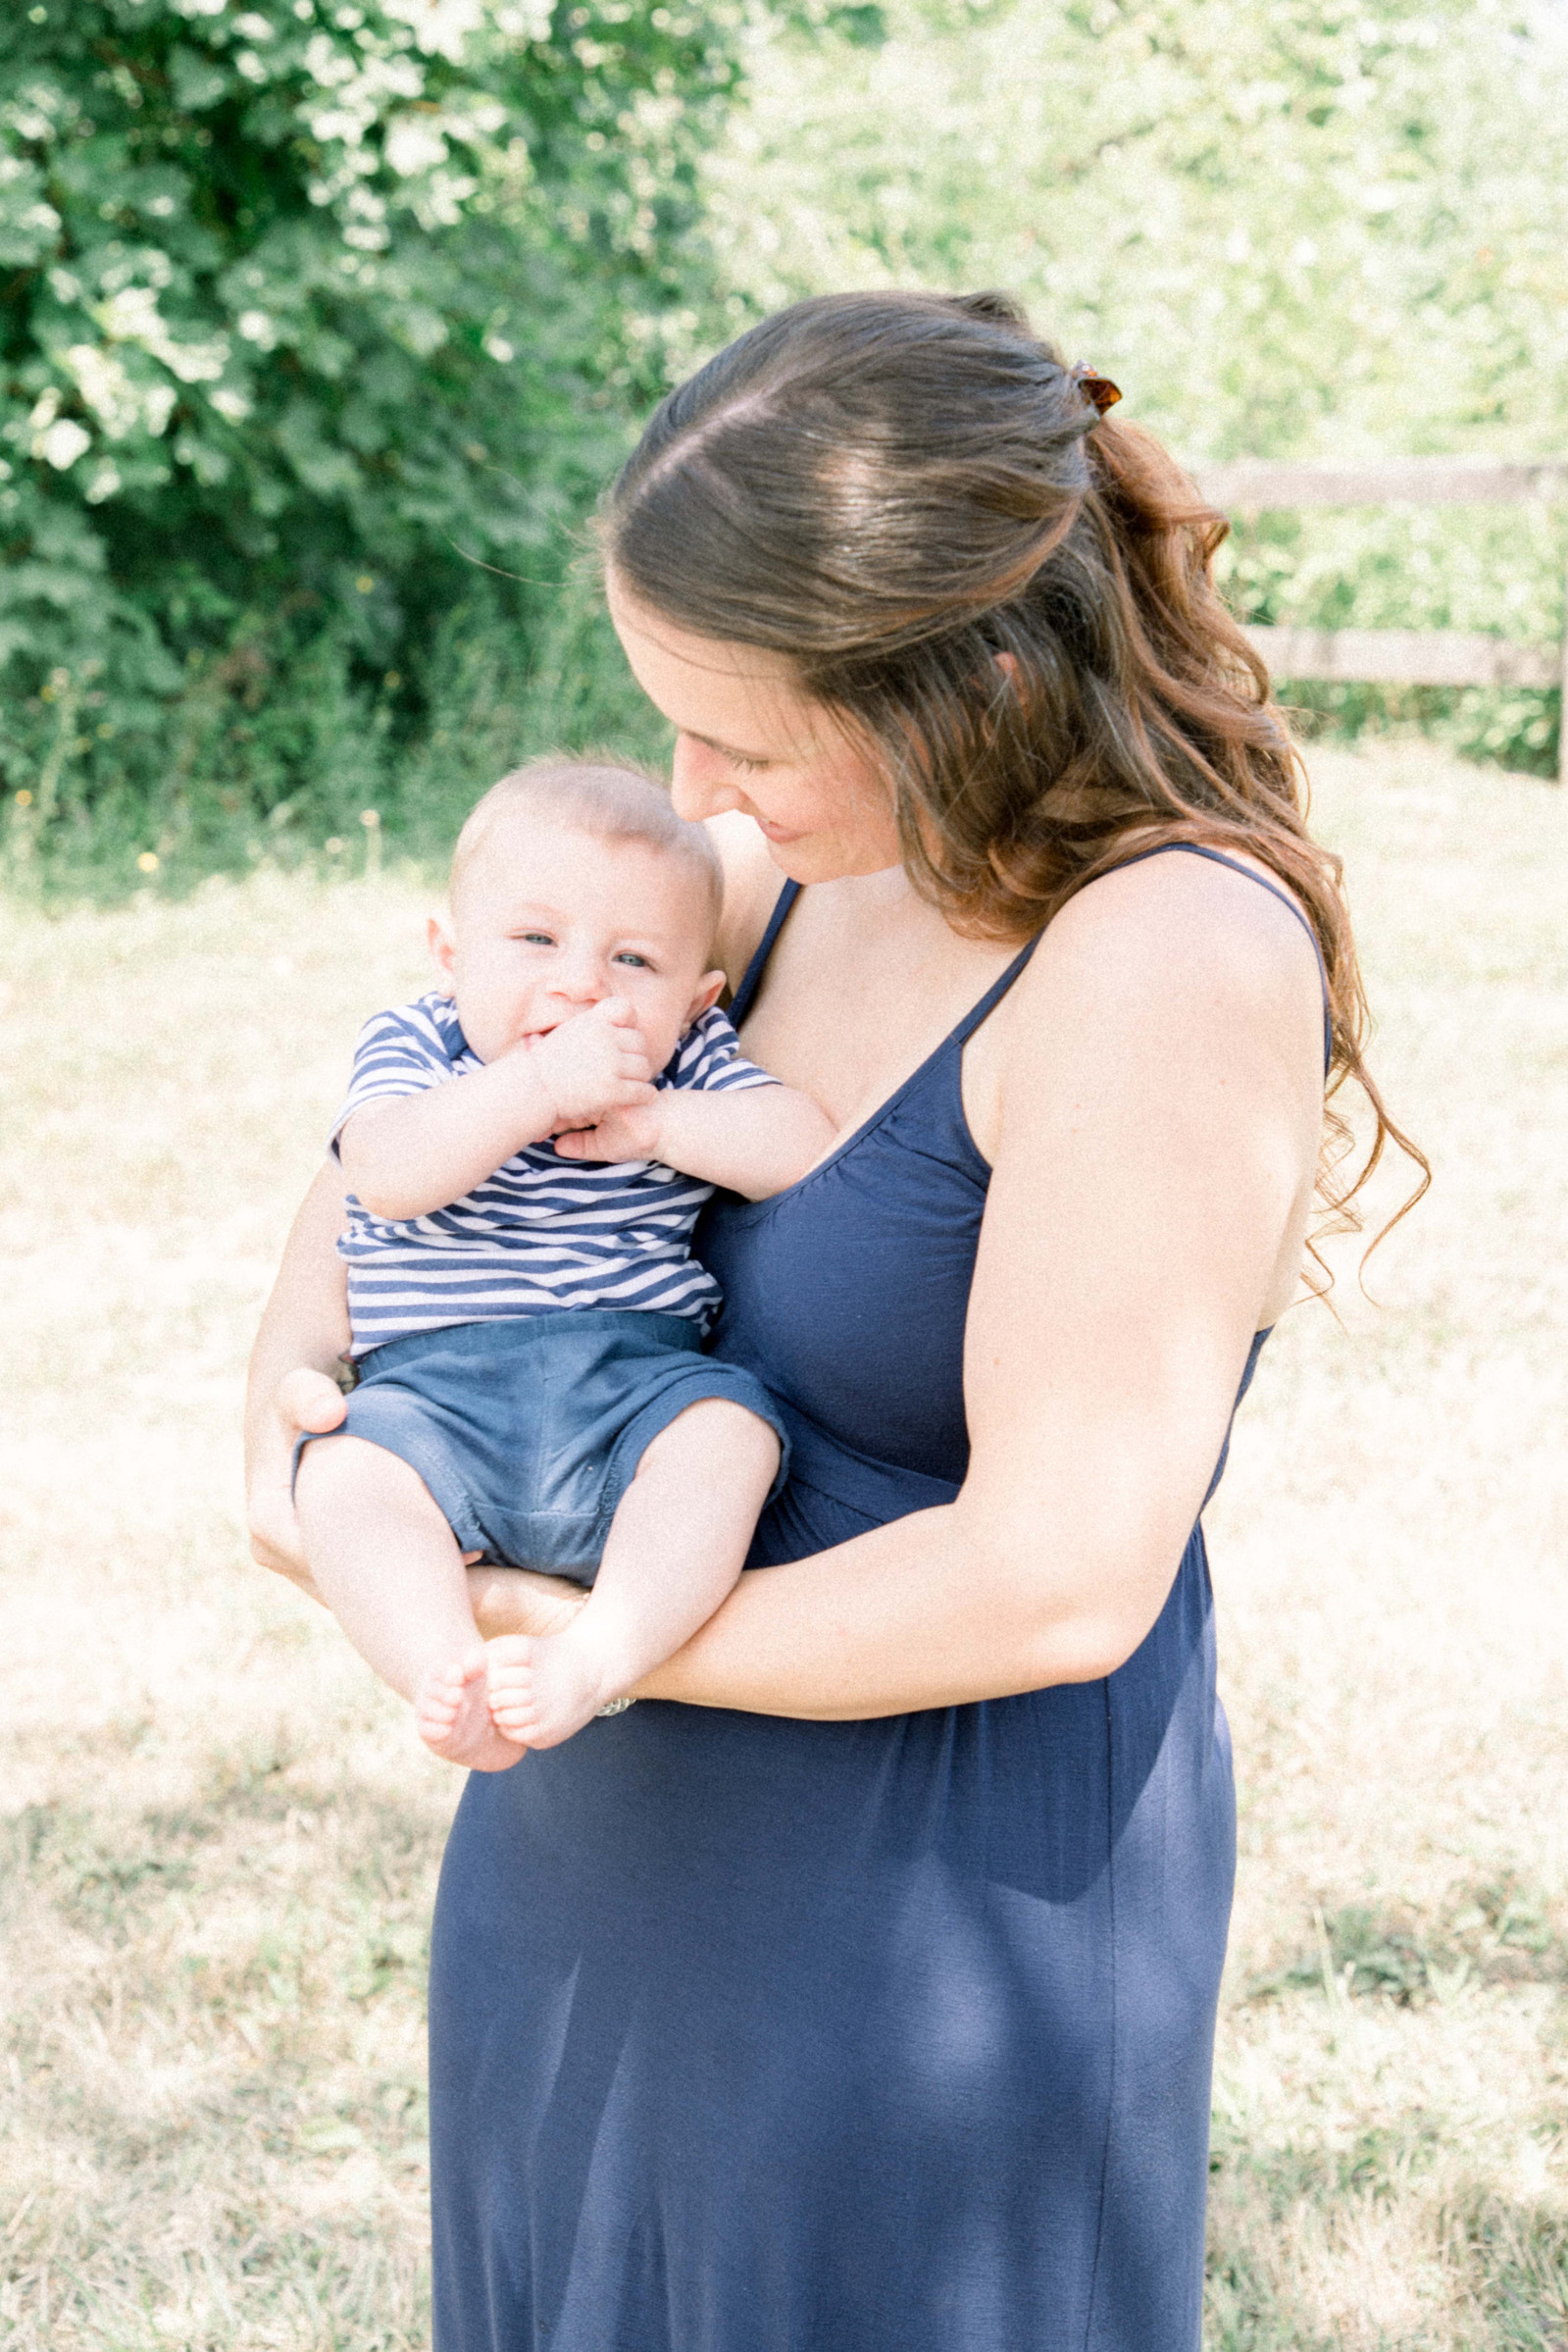 Portrait of mother holding baby boy outside, Emily VanderBeek Photography, Portrait and Family photography, Niagara Photographer, Champlain Photographer, Vaudreuil-Soulanges Photographer, candid photography, authentic photography.